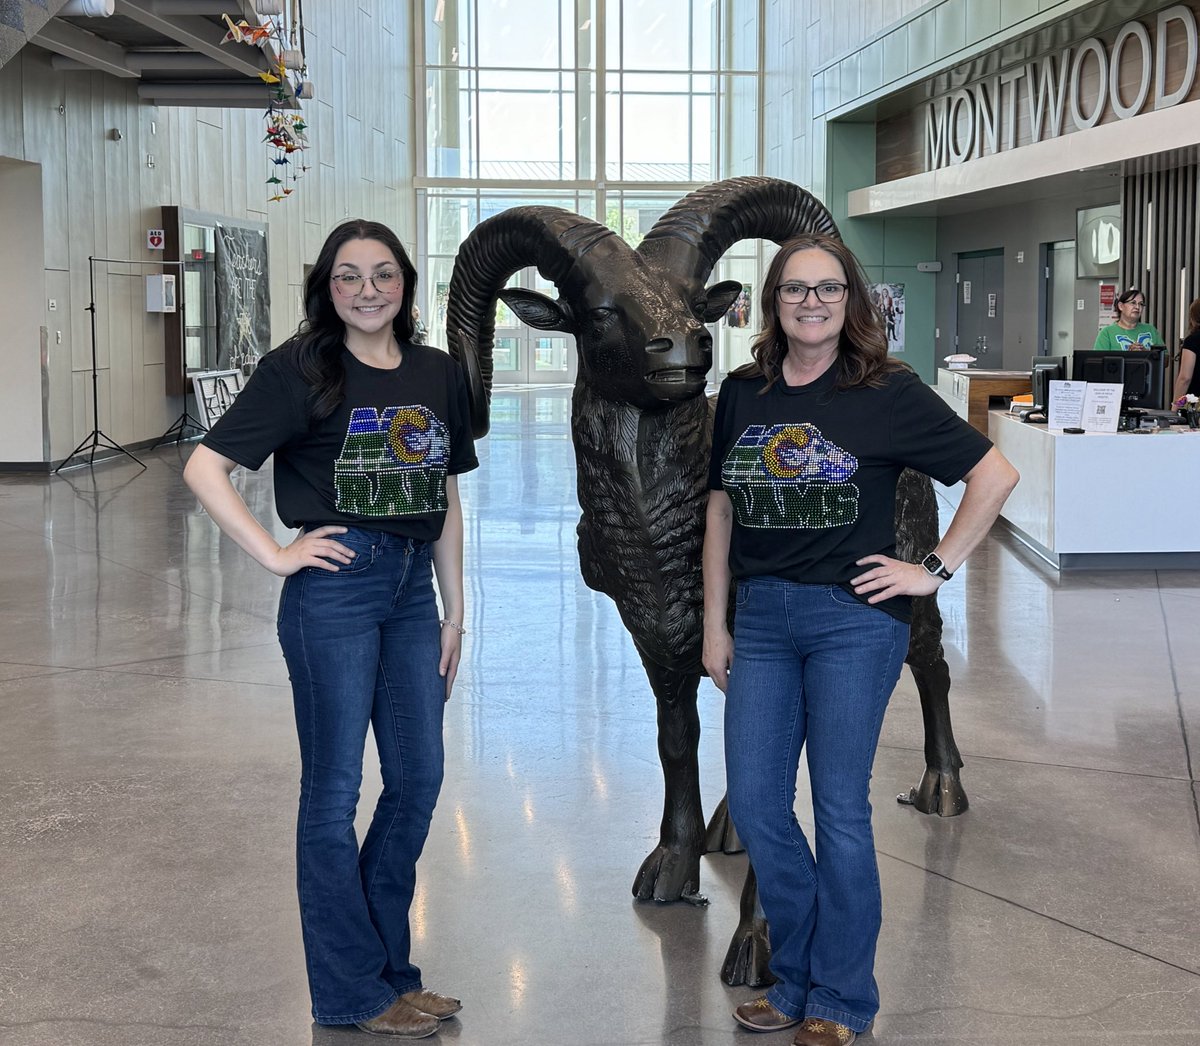 Twin with a Teacher for Day 3️⃣ of #TeacherAppreciateWeek @MontwoodHS! @AnaPlayer_MHS @mhs_sb @JJoseph_MHS @mhs_class_of_26